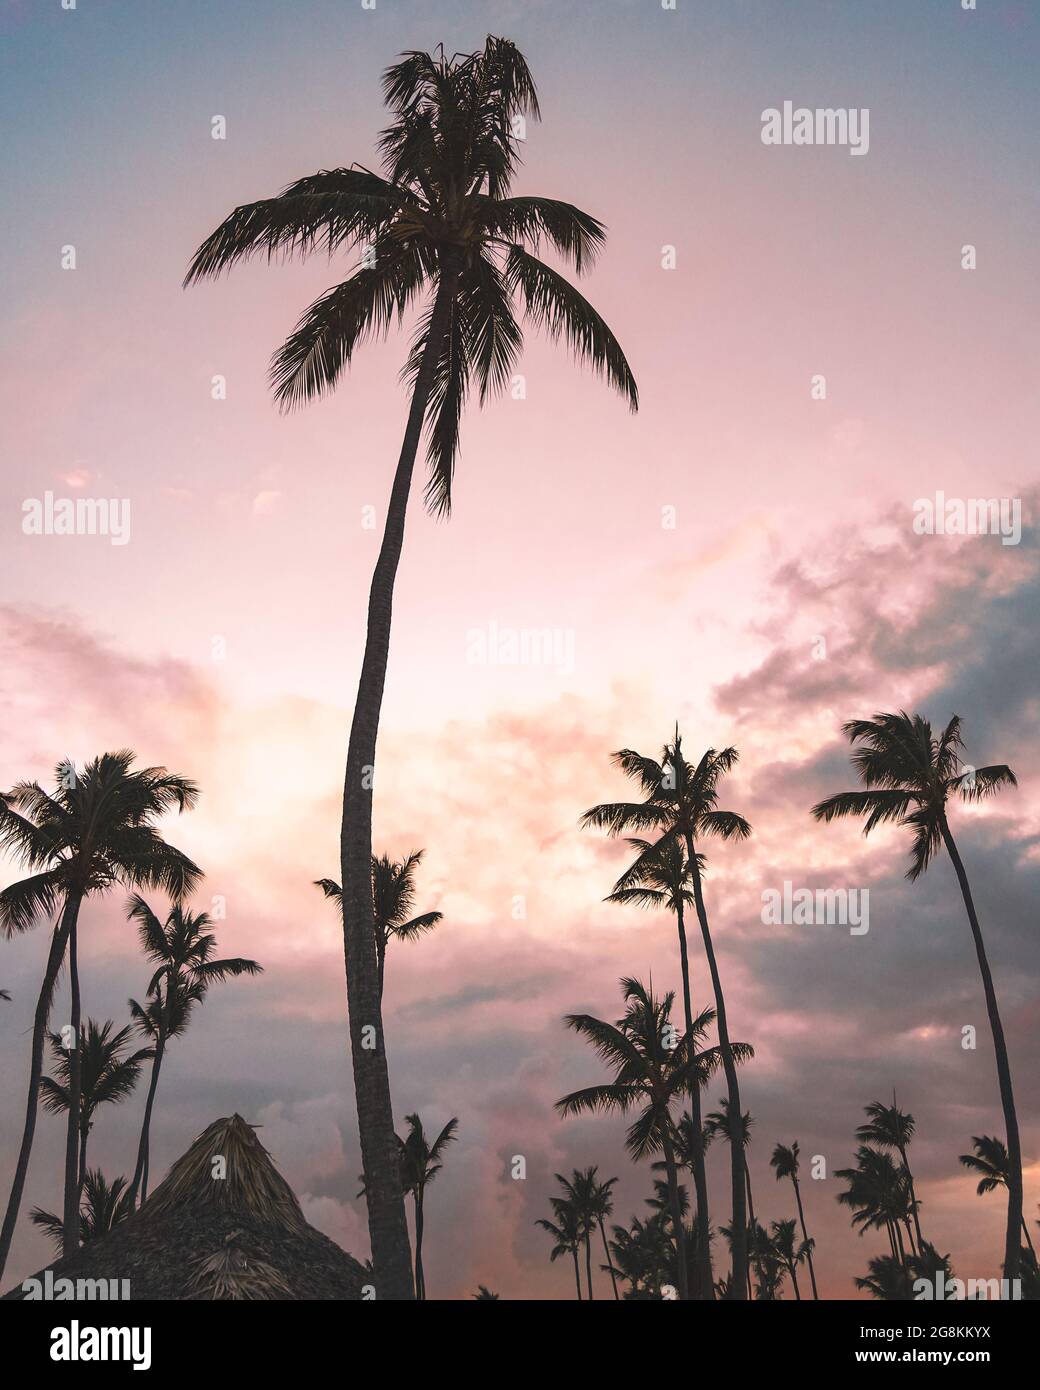 Palm trees under a cloudy sky during a beautiful sunset